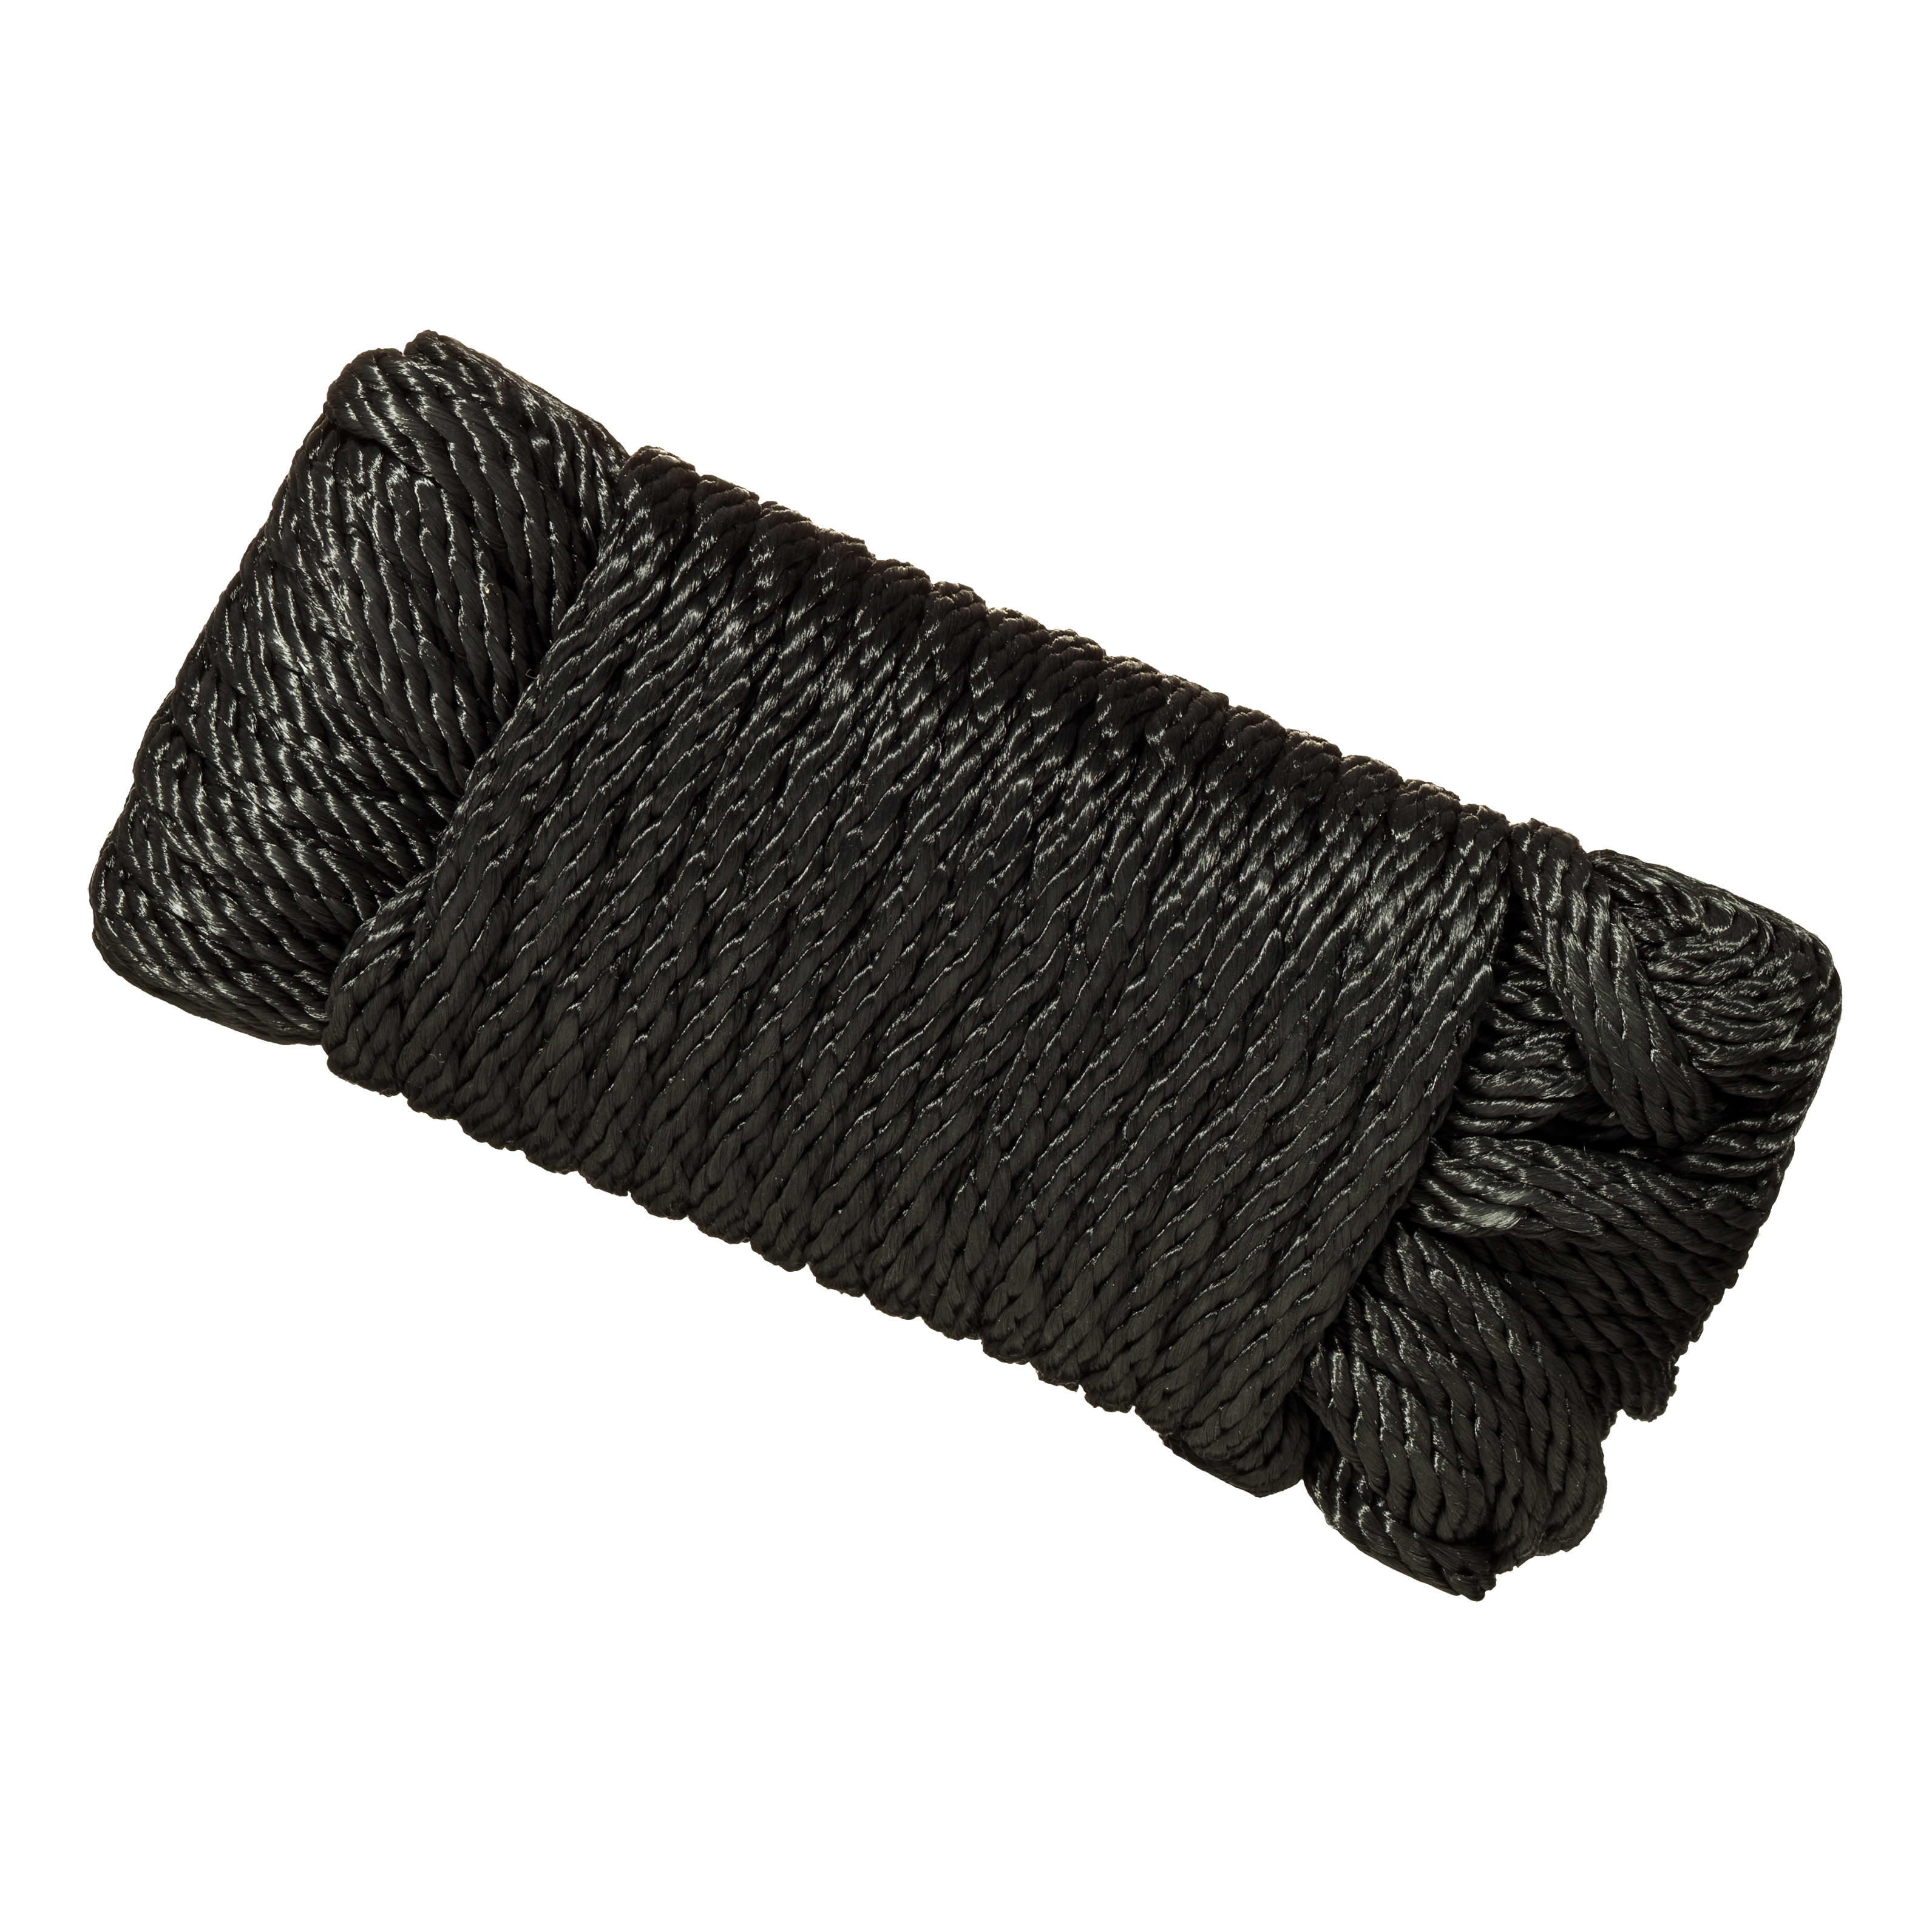 Bass Pro Shops Solid Braid MFP Rope - Black - 5/16" x 50'